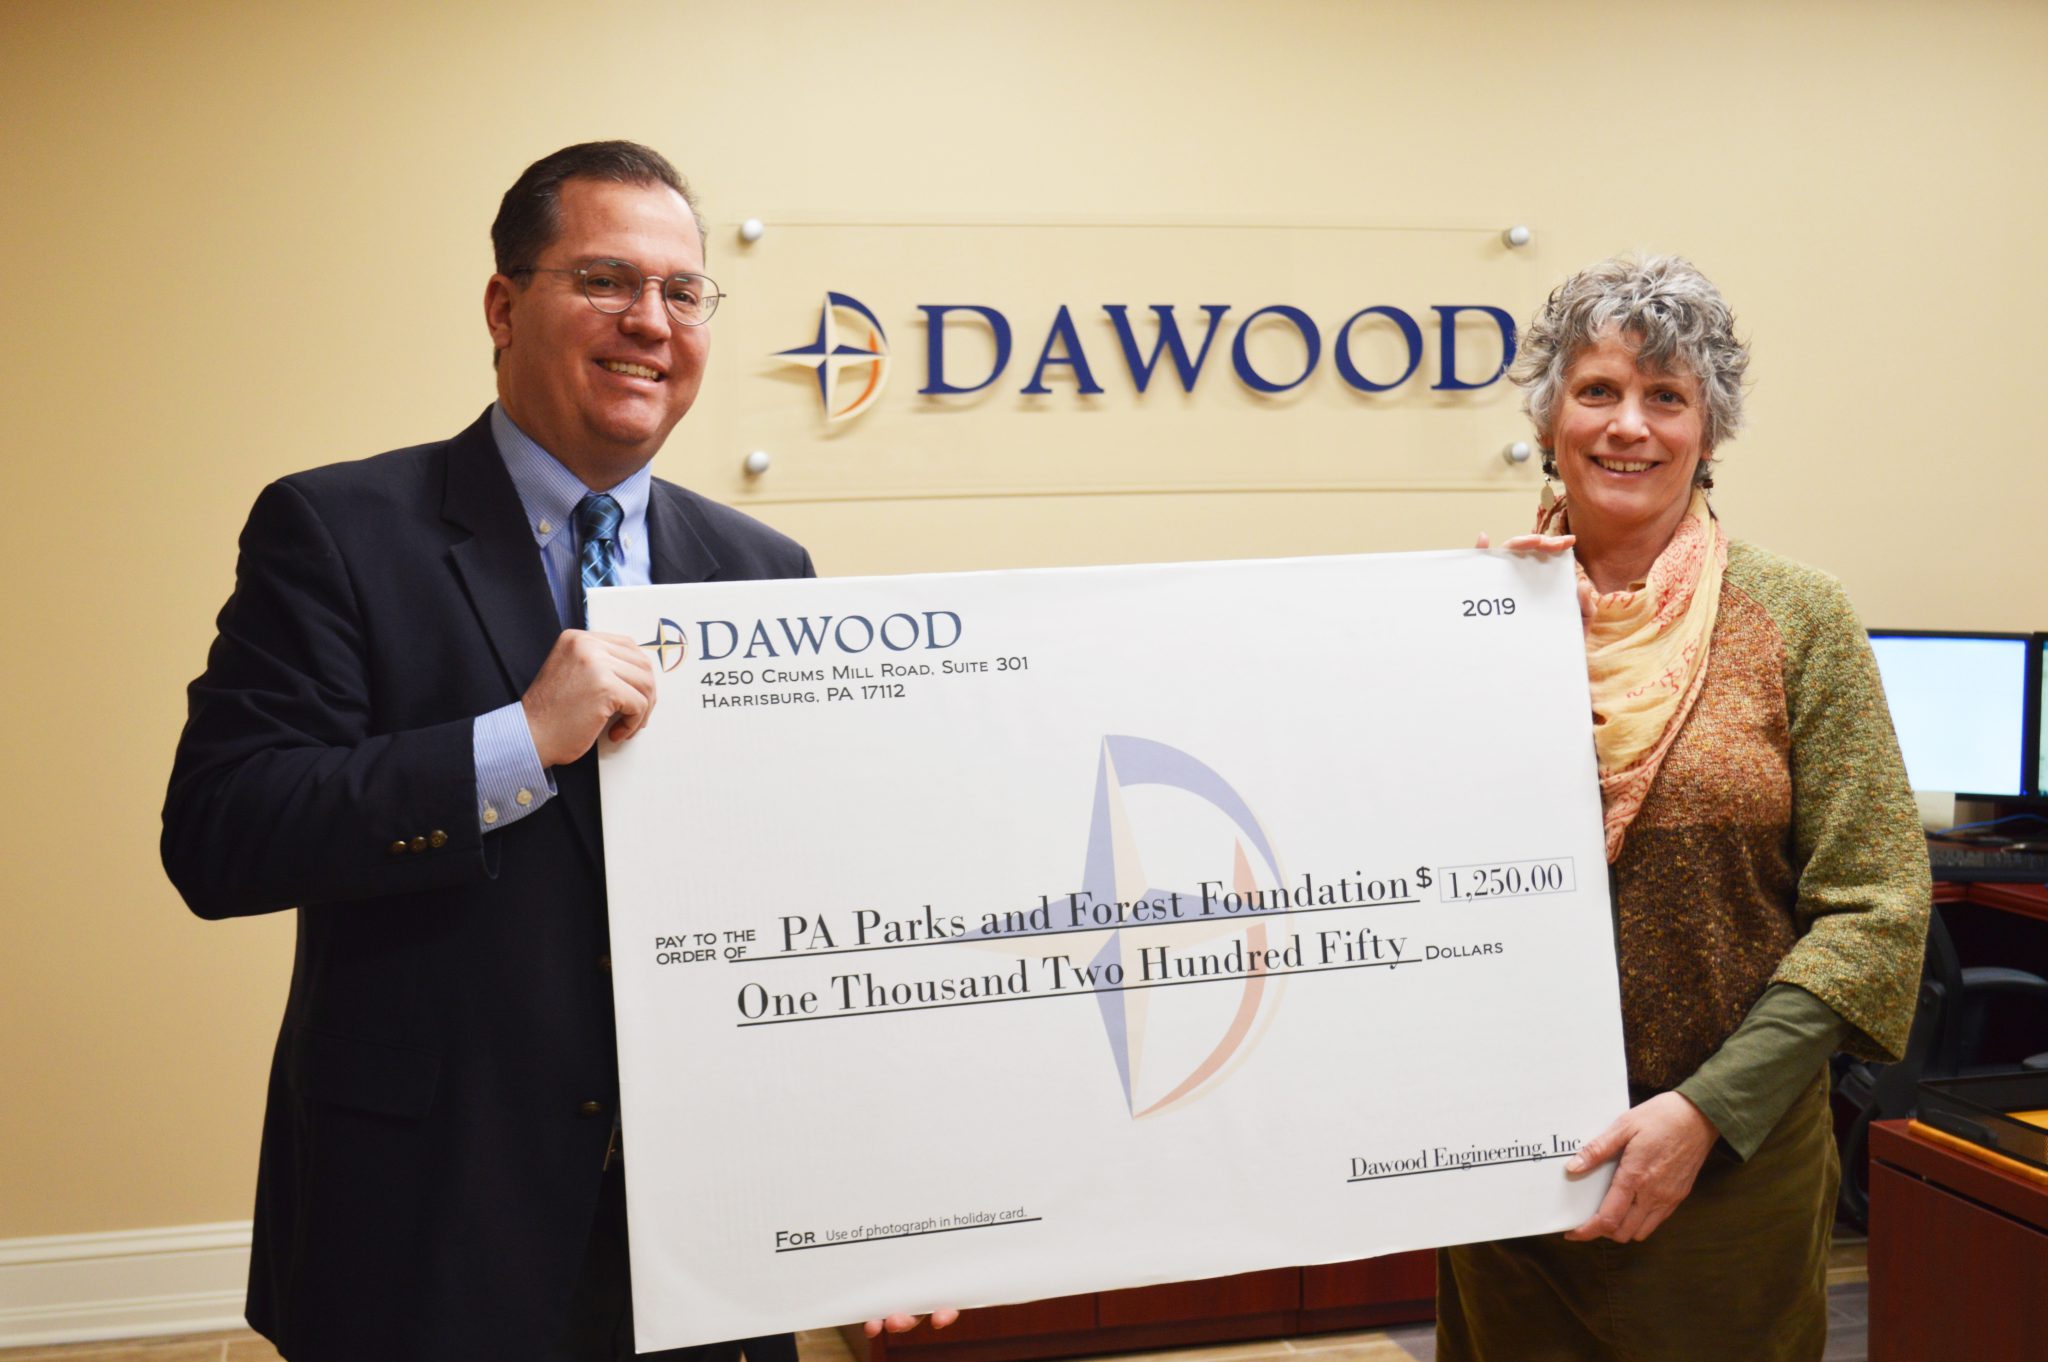 Dawood Donates to the PA Parks & Forests Foundation